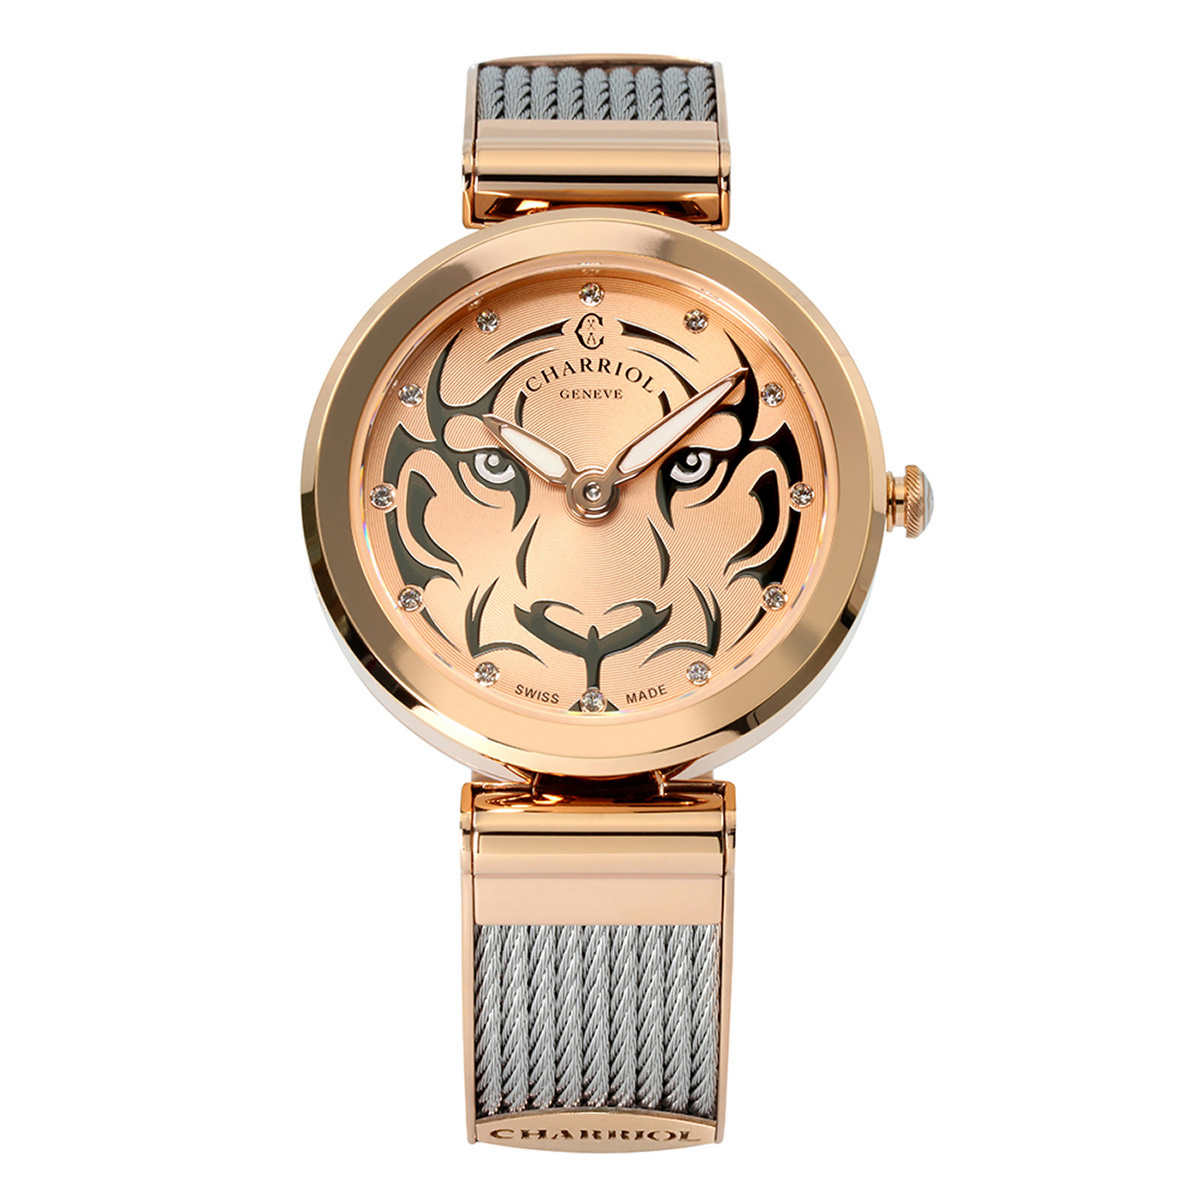 CHARRIOL Forever Tiger Rose Gold & Black Dial Ladies Watch   Costco